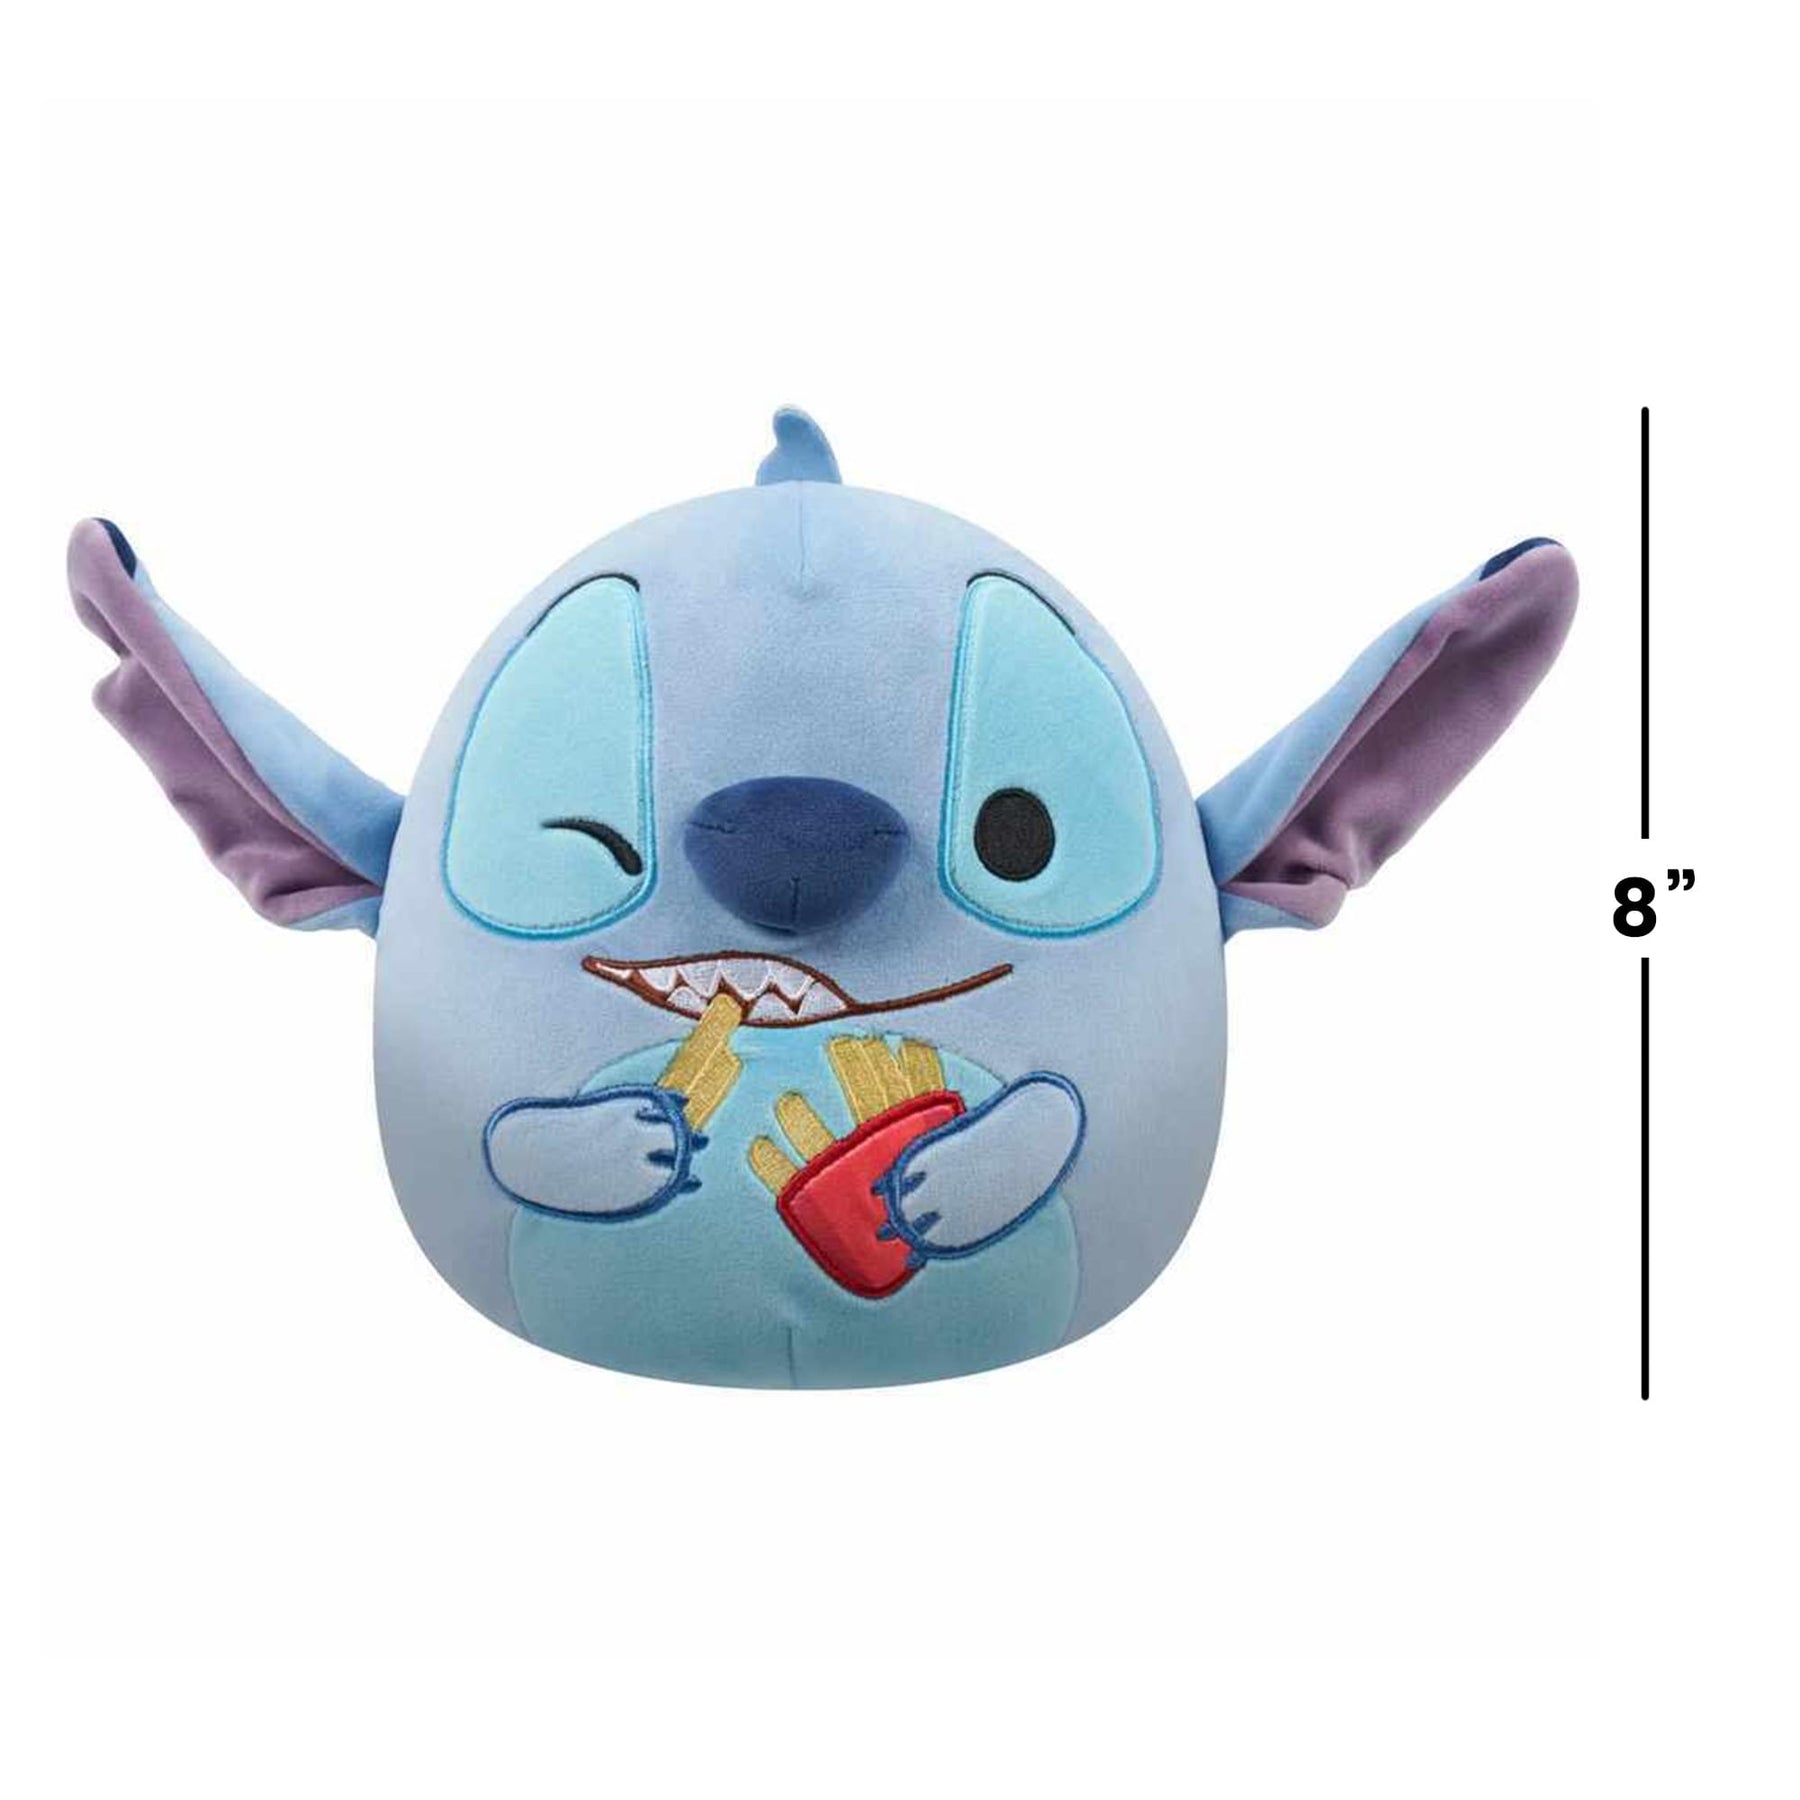 Squishmallows Disney 8 Inch Plush | Stitch with French Fries